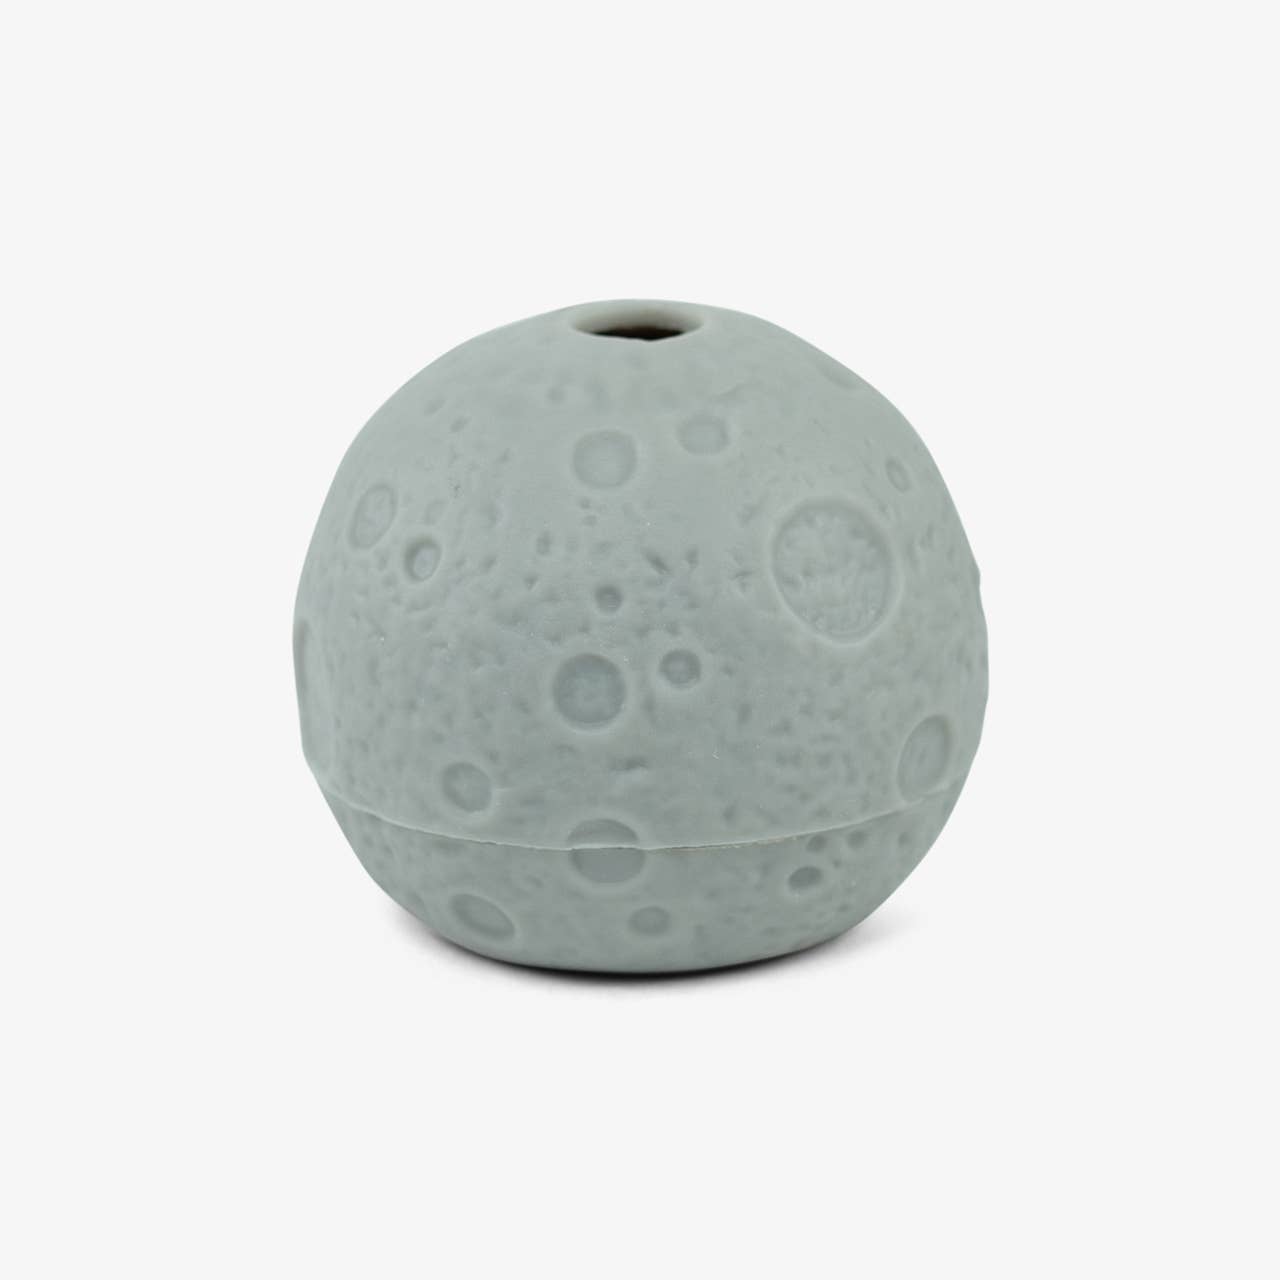 https://www.interstellarseller.com/cdn/shop/products/Moon-Ice-Ball-Mold-Round-Sphere-Whiskey-Ice-Ball-Maker-Space-Gift-Daydreamer-1_2048x2048.jpg?v=1606764392